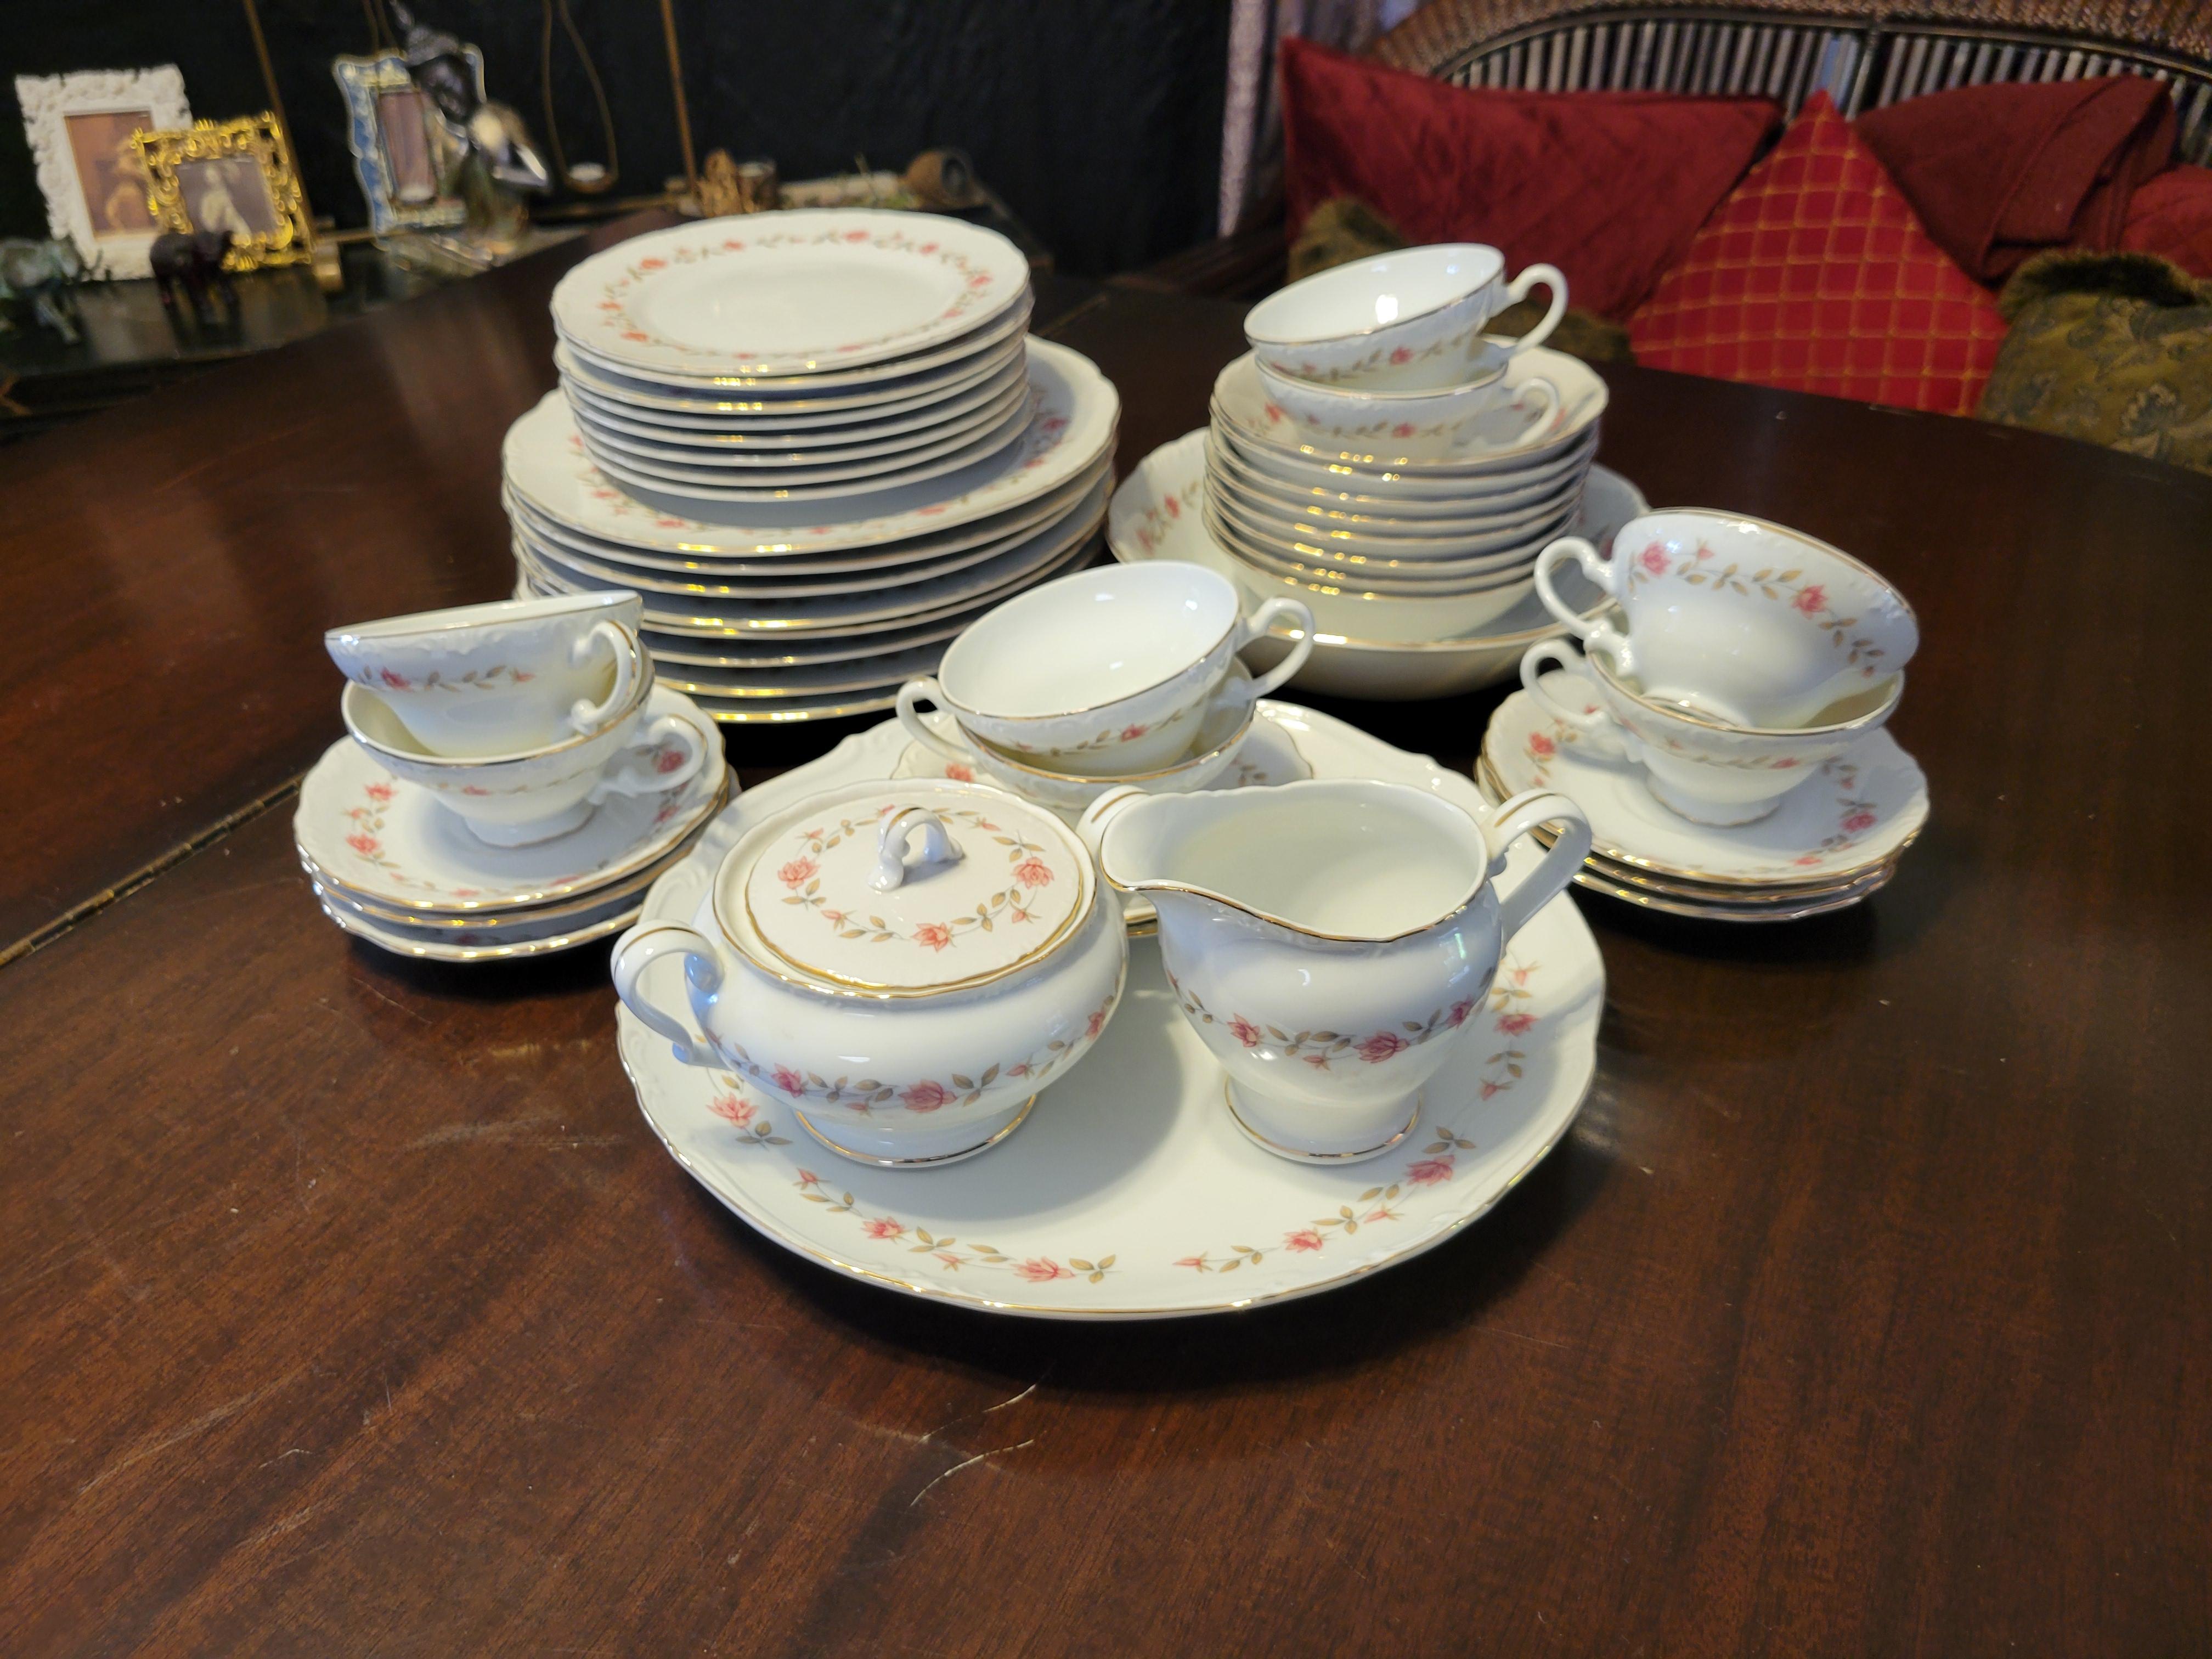 1950, Eternal Rose (Japan) Fine China Dining Set for 8 - 44 pieces. Ships Free  In Excellent Condition For Sale In Phoenix, AZ